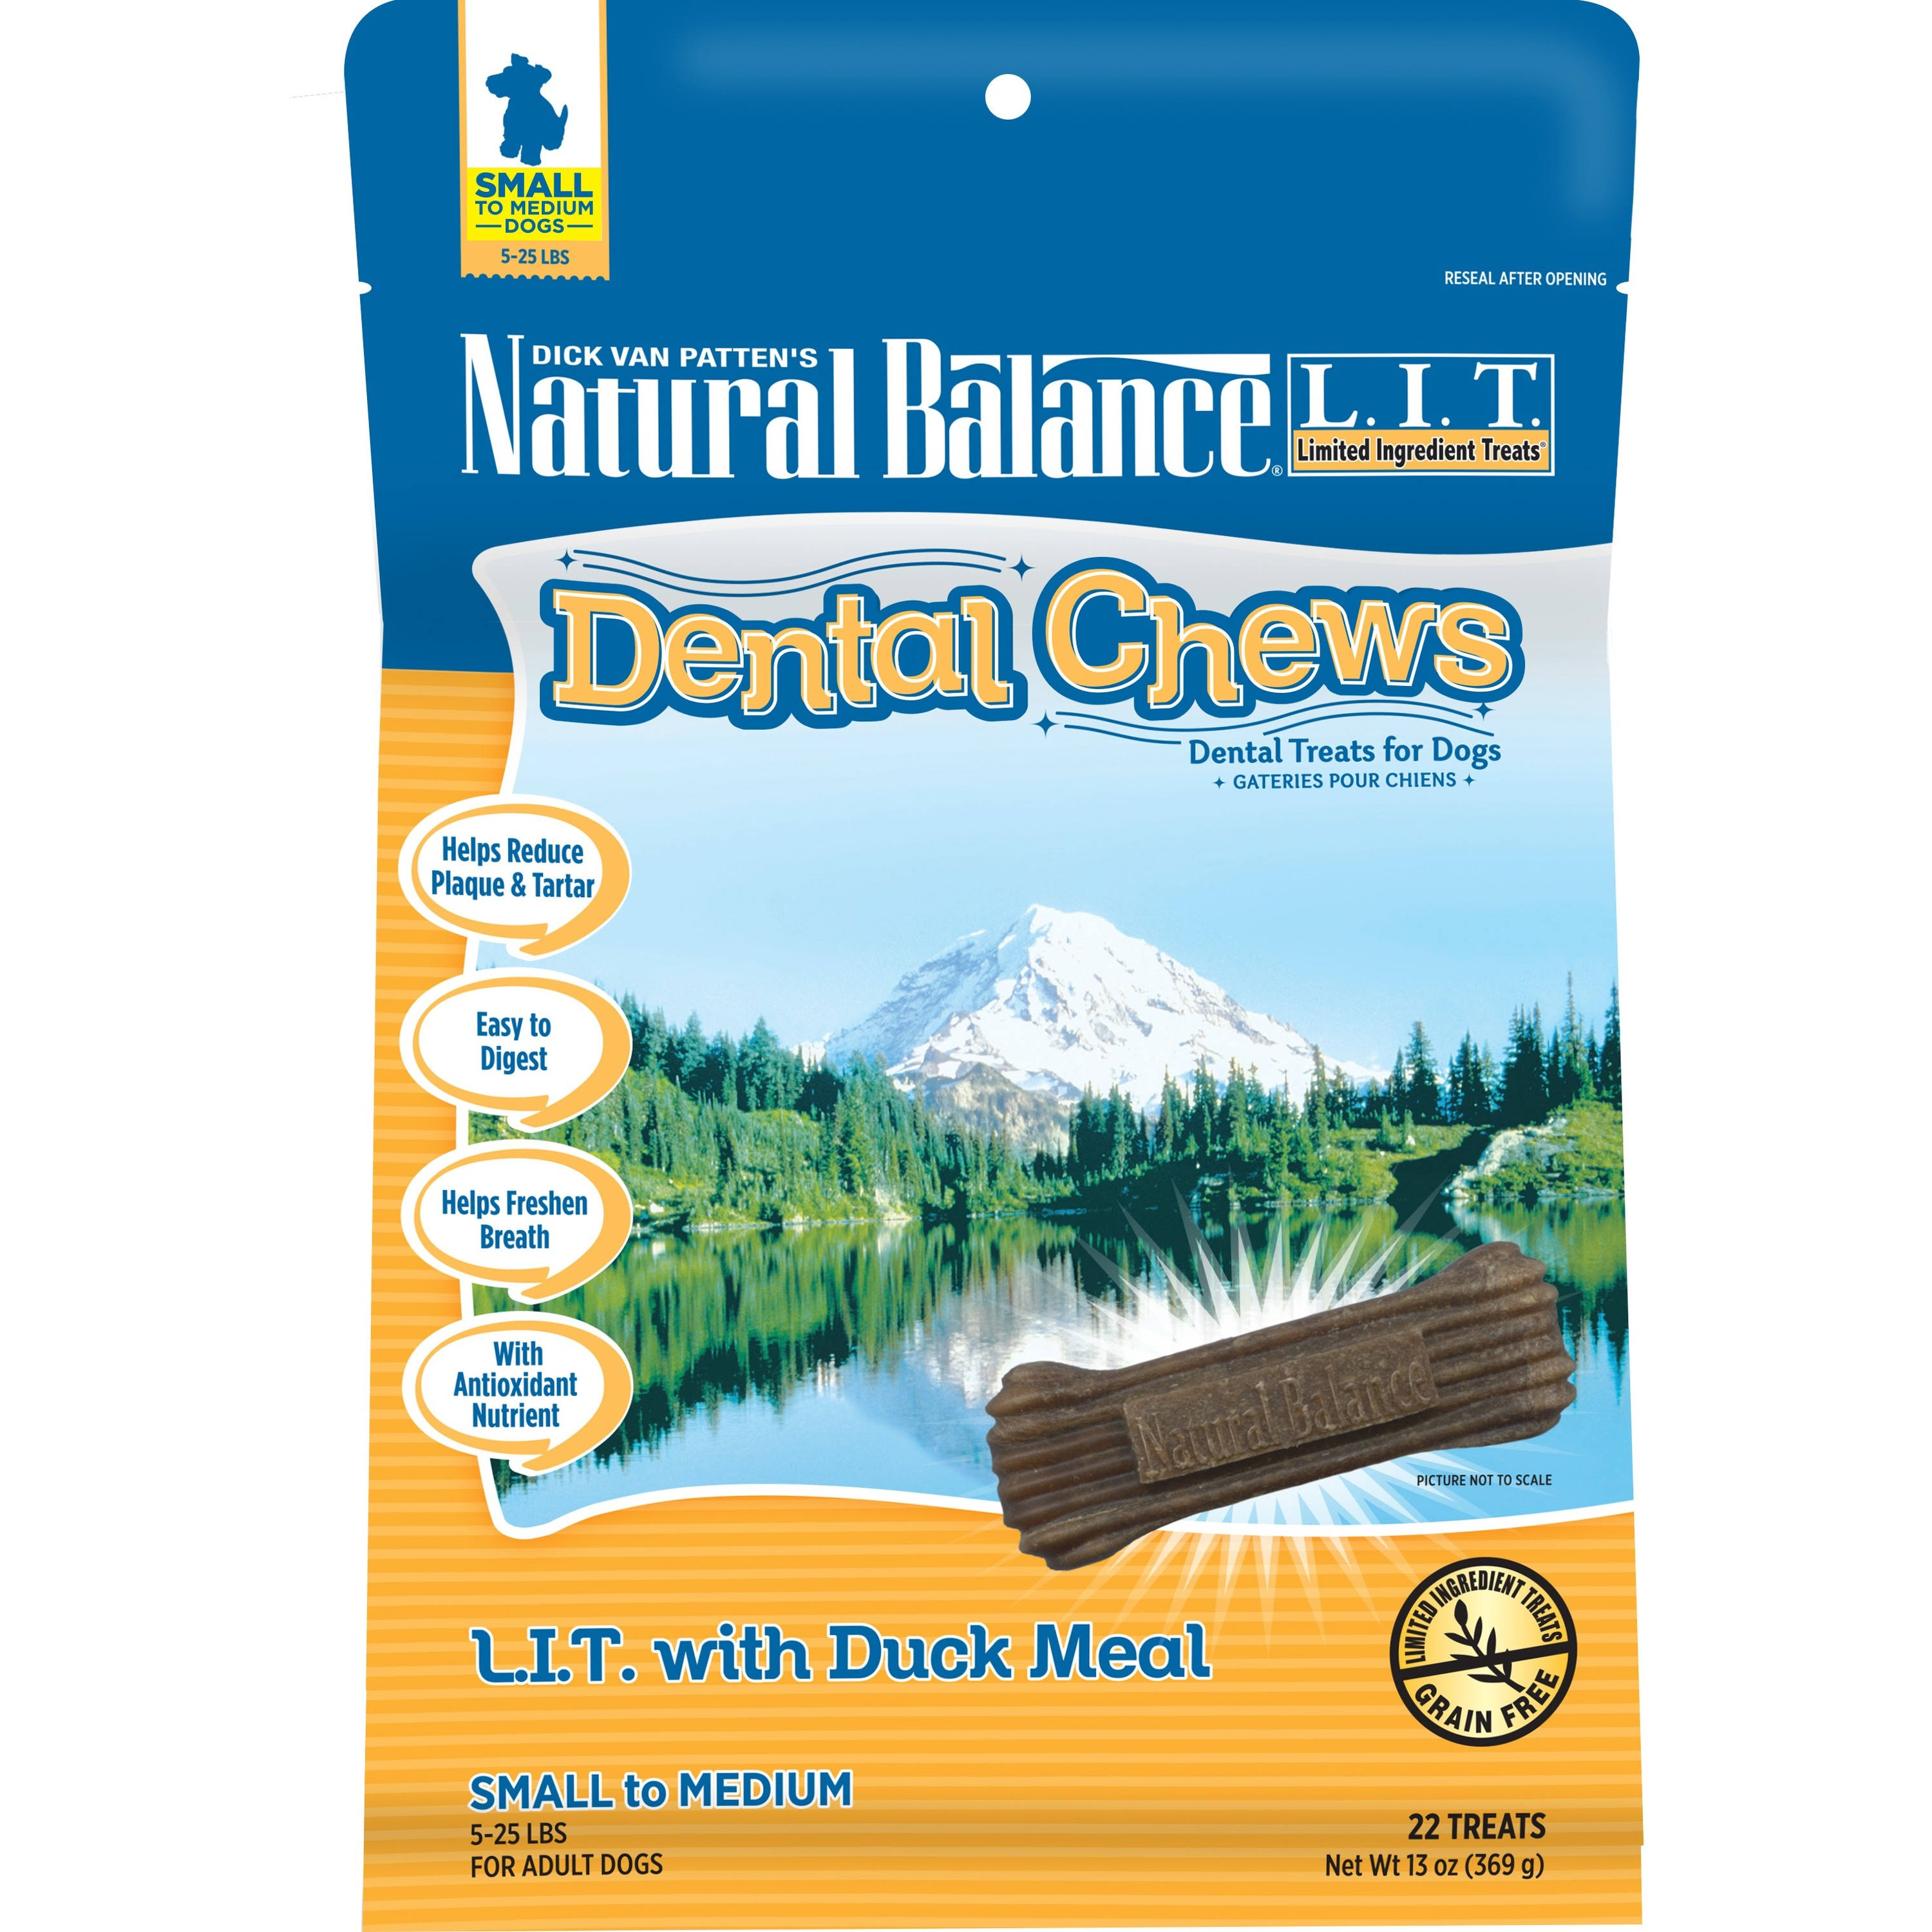 Natural Balance Limited Ingredient Treats Dental Chews - Duck Meal